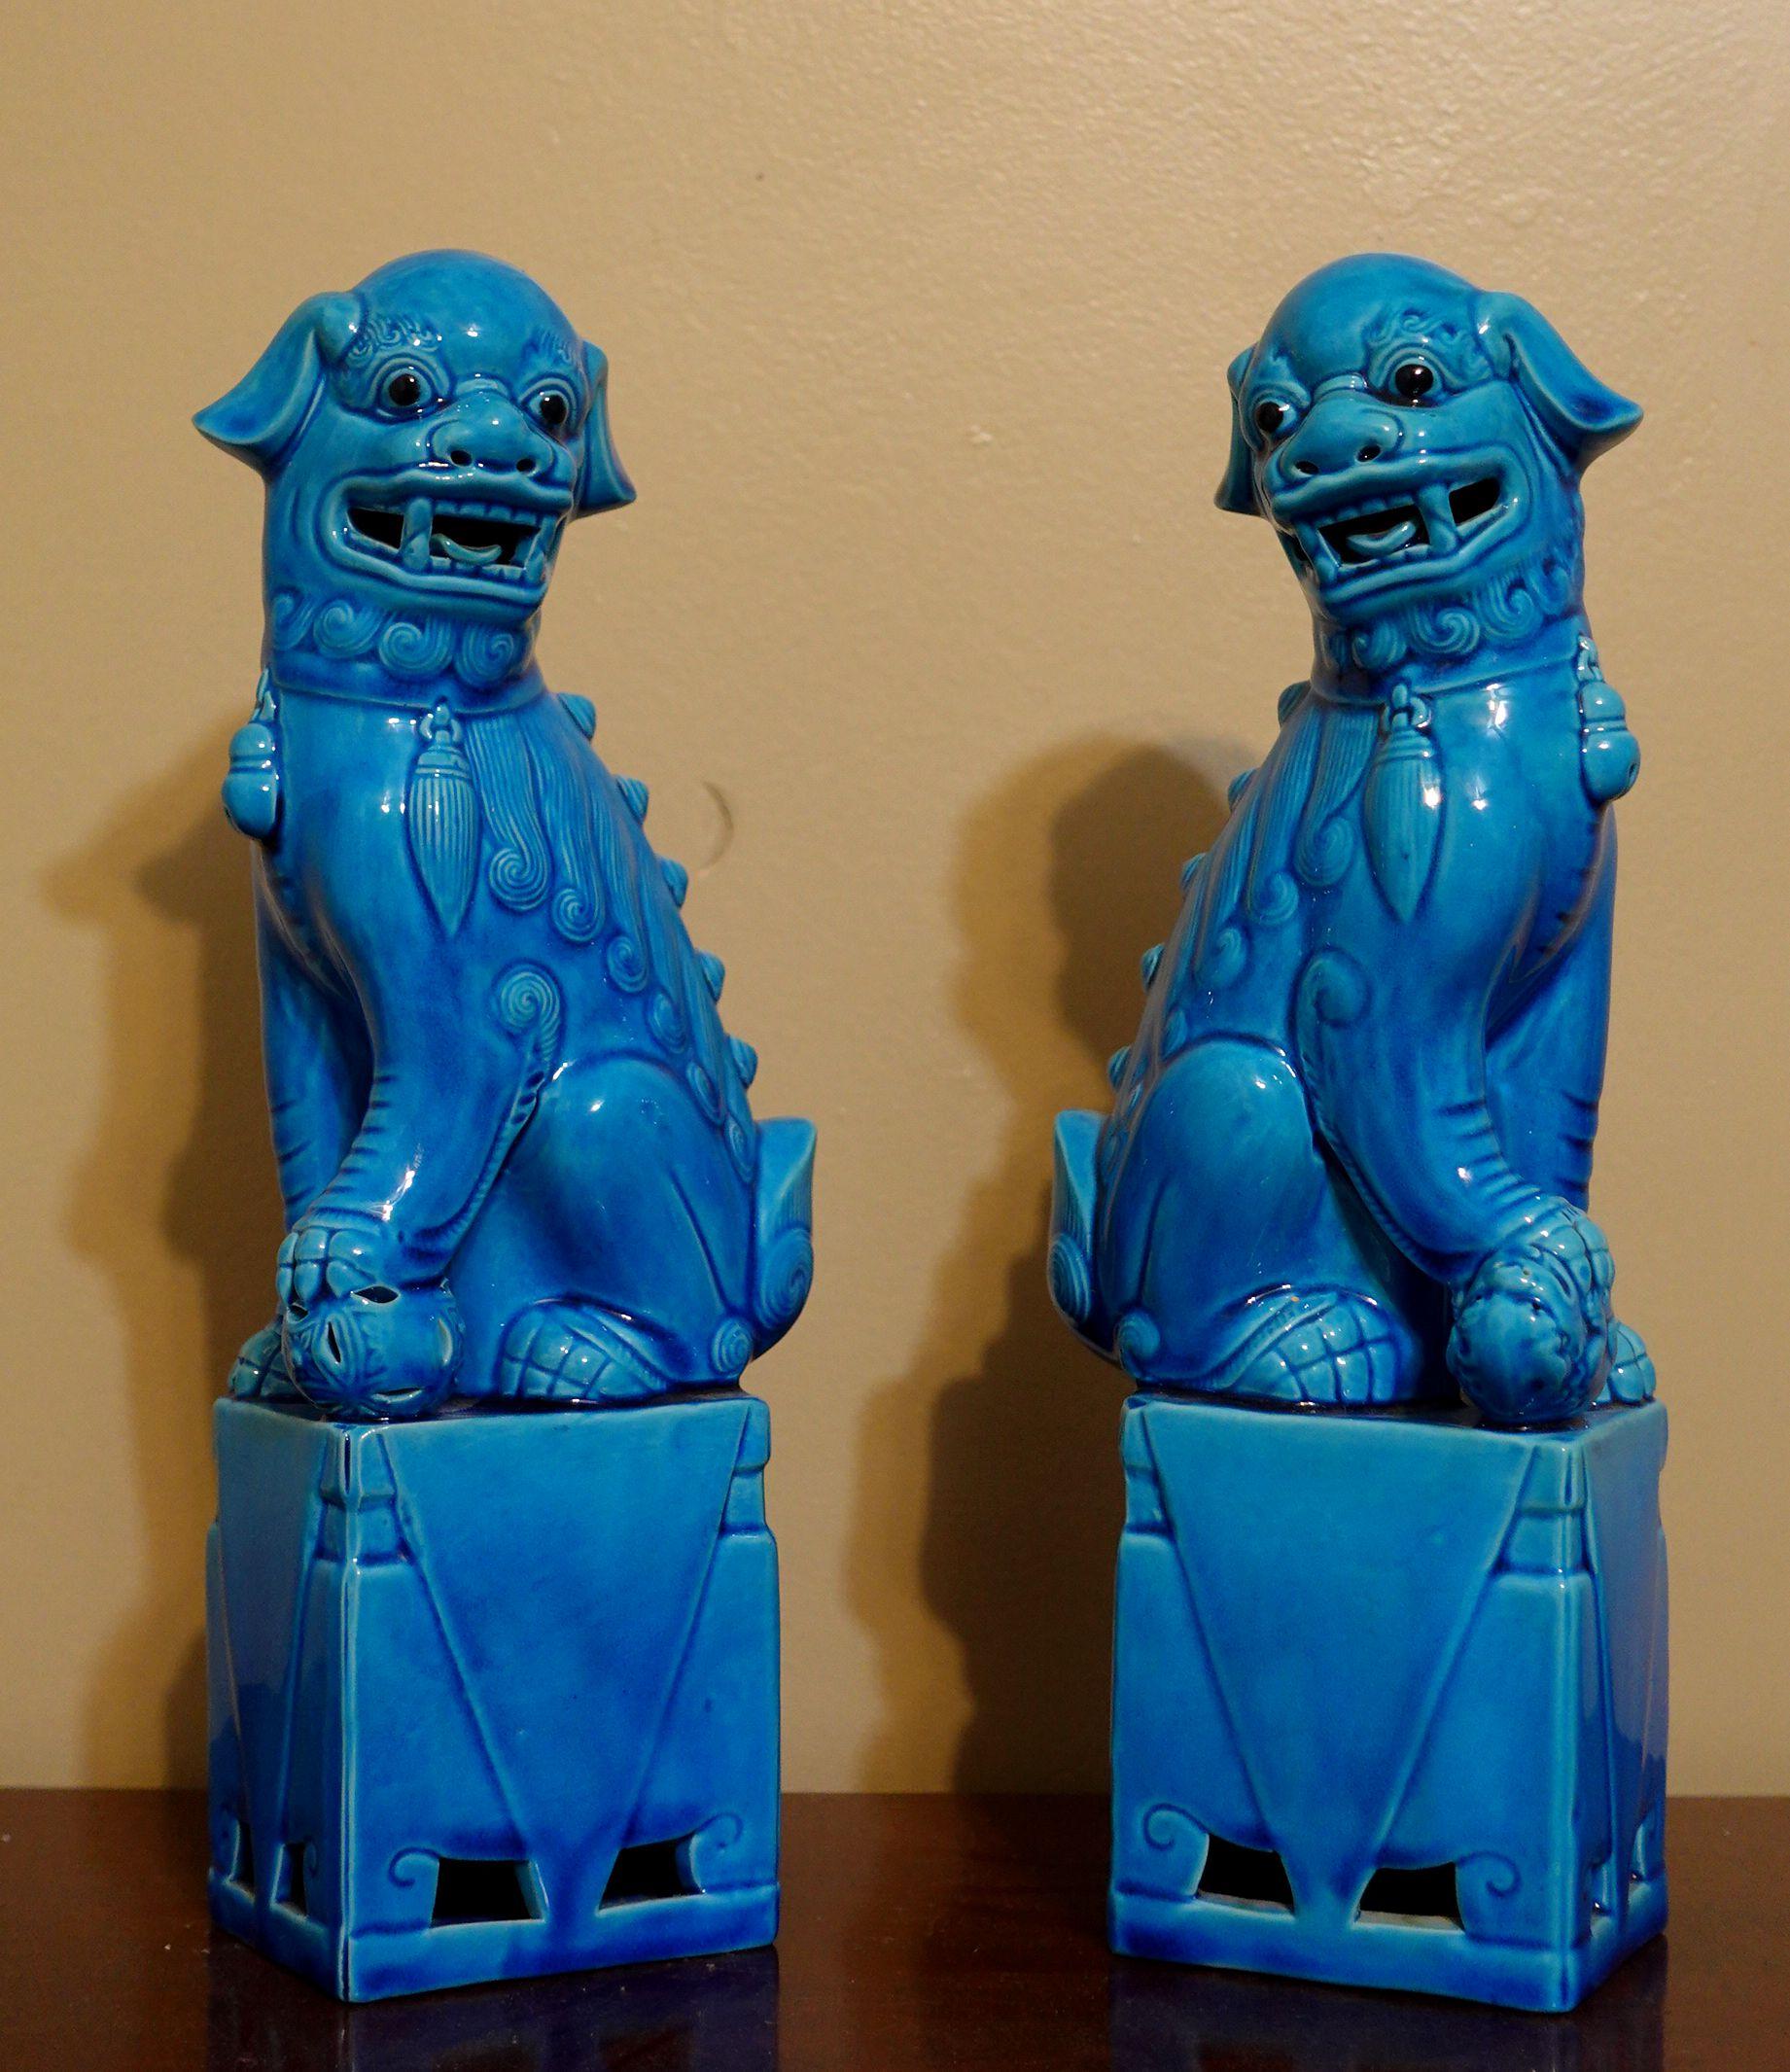 Fine and very detailed pair of Chinese turquoise glazed foo dogs from the mid-20th century. The hollow biscuit porcelain figures stand raised on a rectangular base and are looking sideways with open mouths and tongues showing teeth each with a